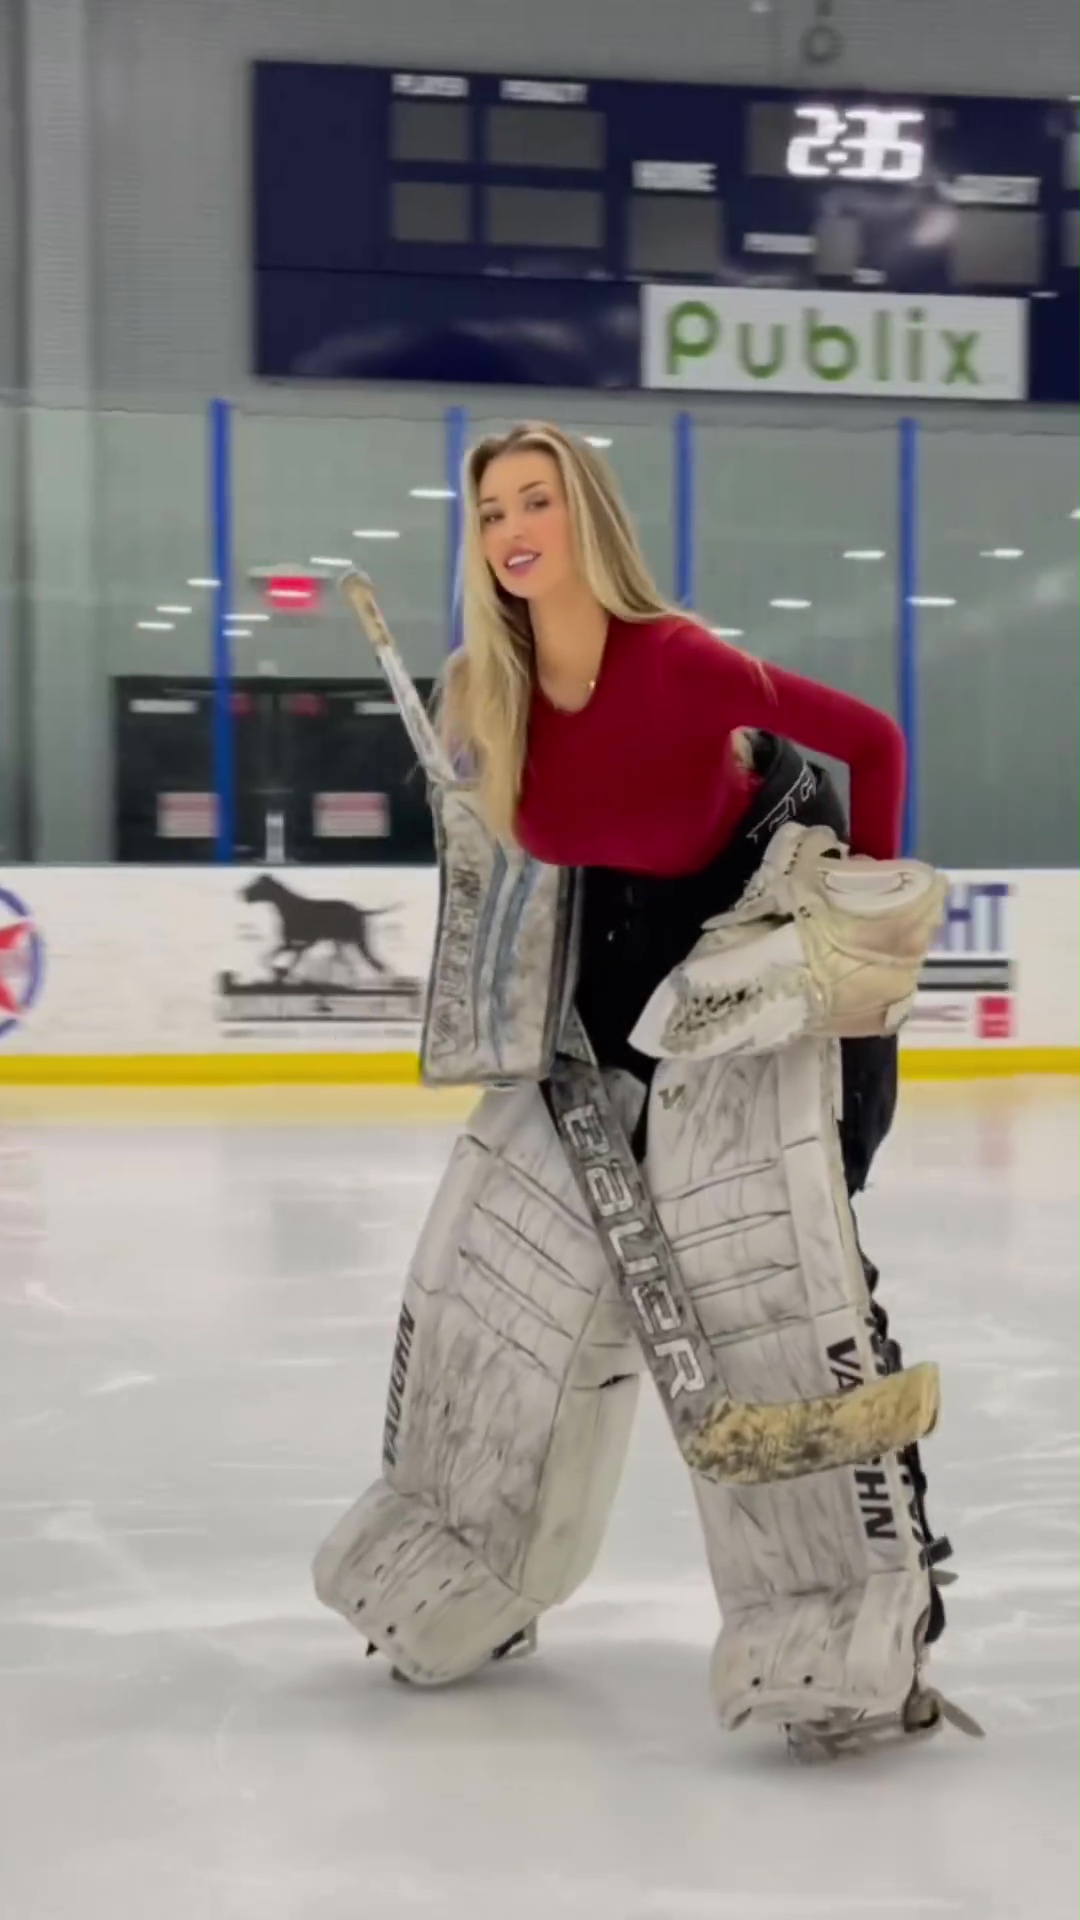 She returned to the ice and showed that she was 'a keeper'